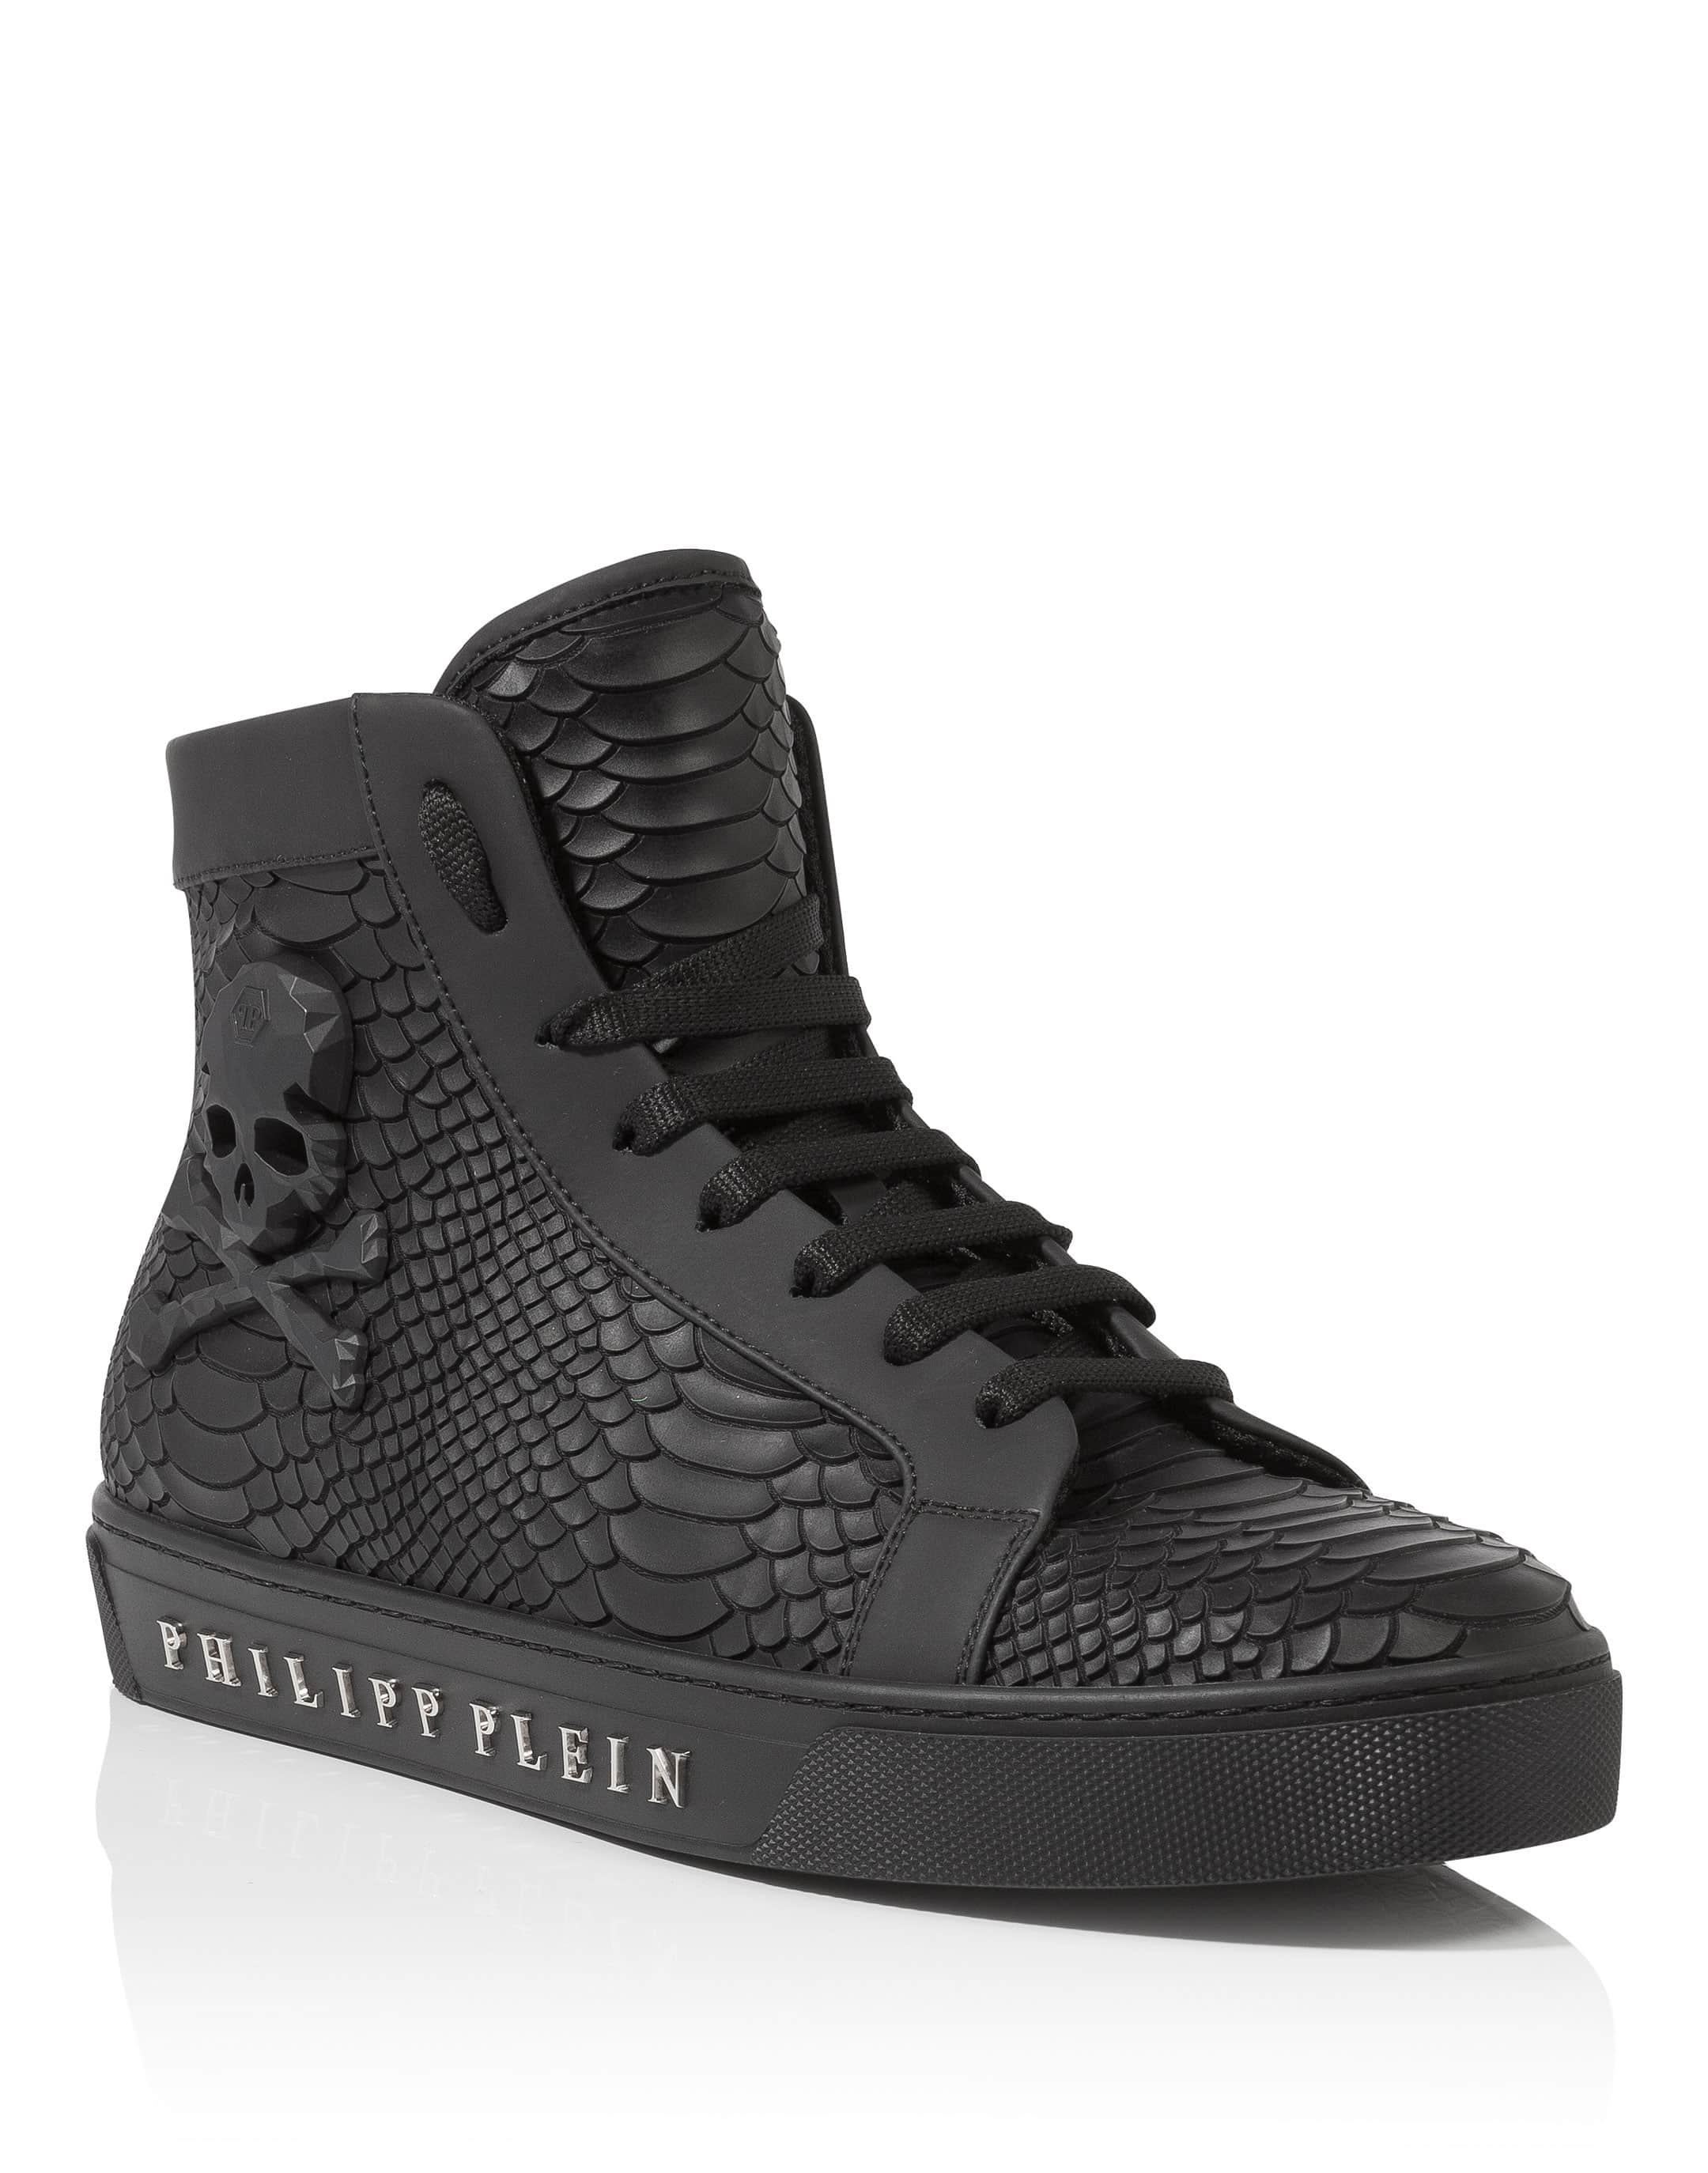 Sneakers "Drinking fast" | Philipp Plein Outlet